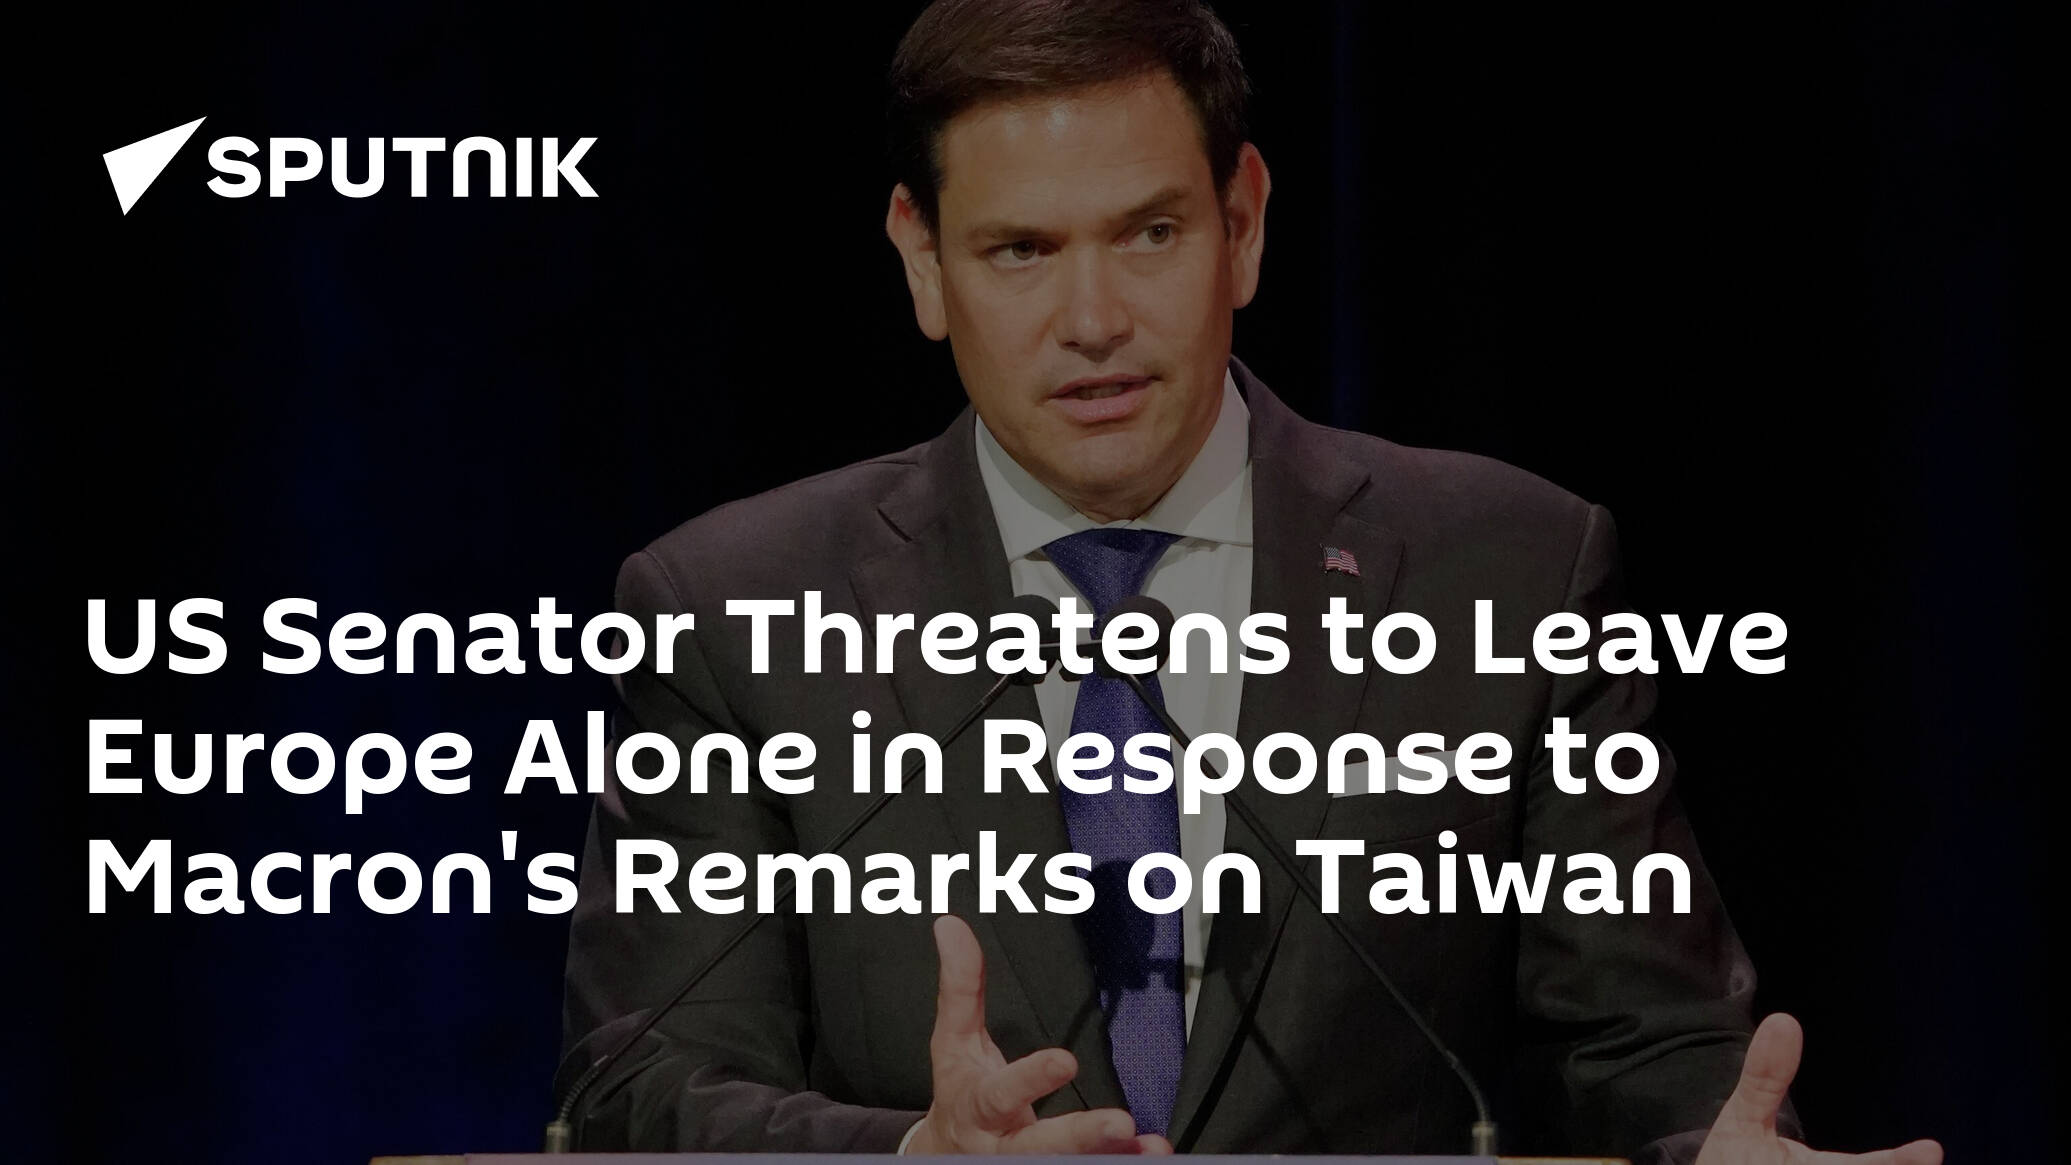 US Senator Threatens to Leave Europe Alone in Response to Macron's Remarks on Taiwan